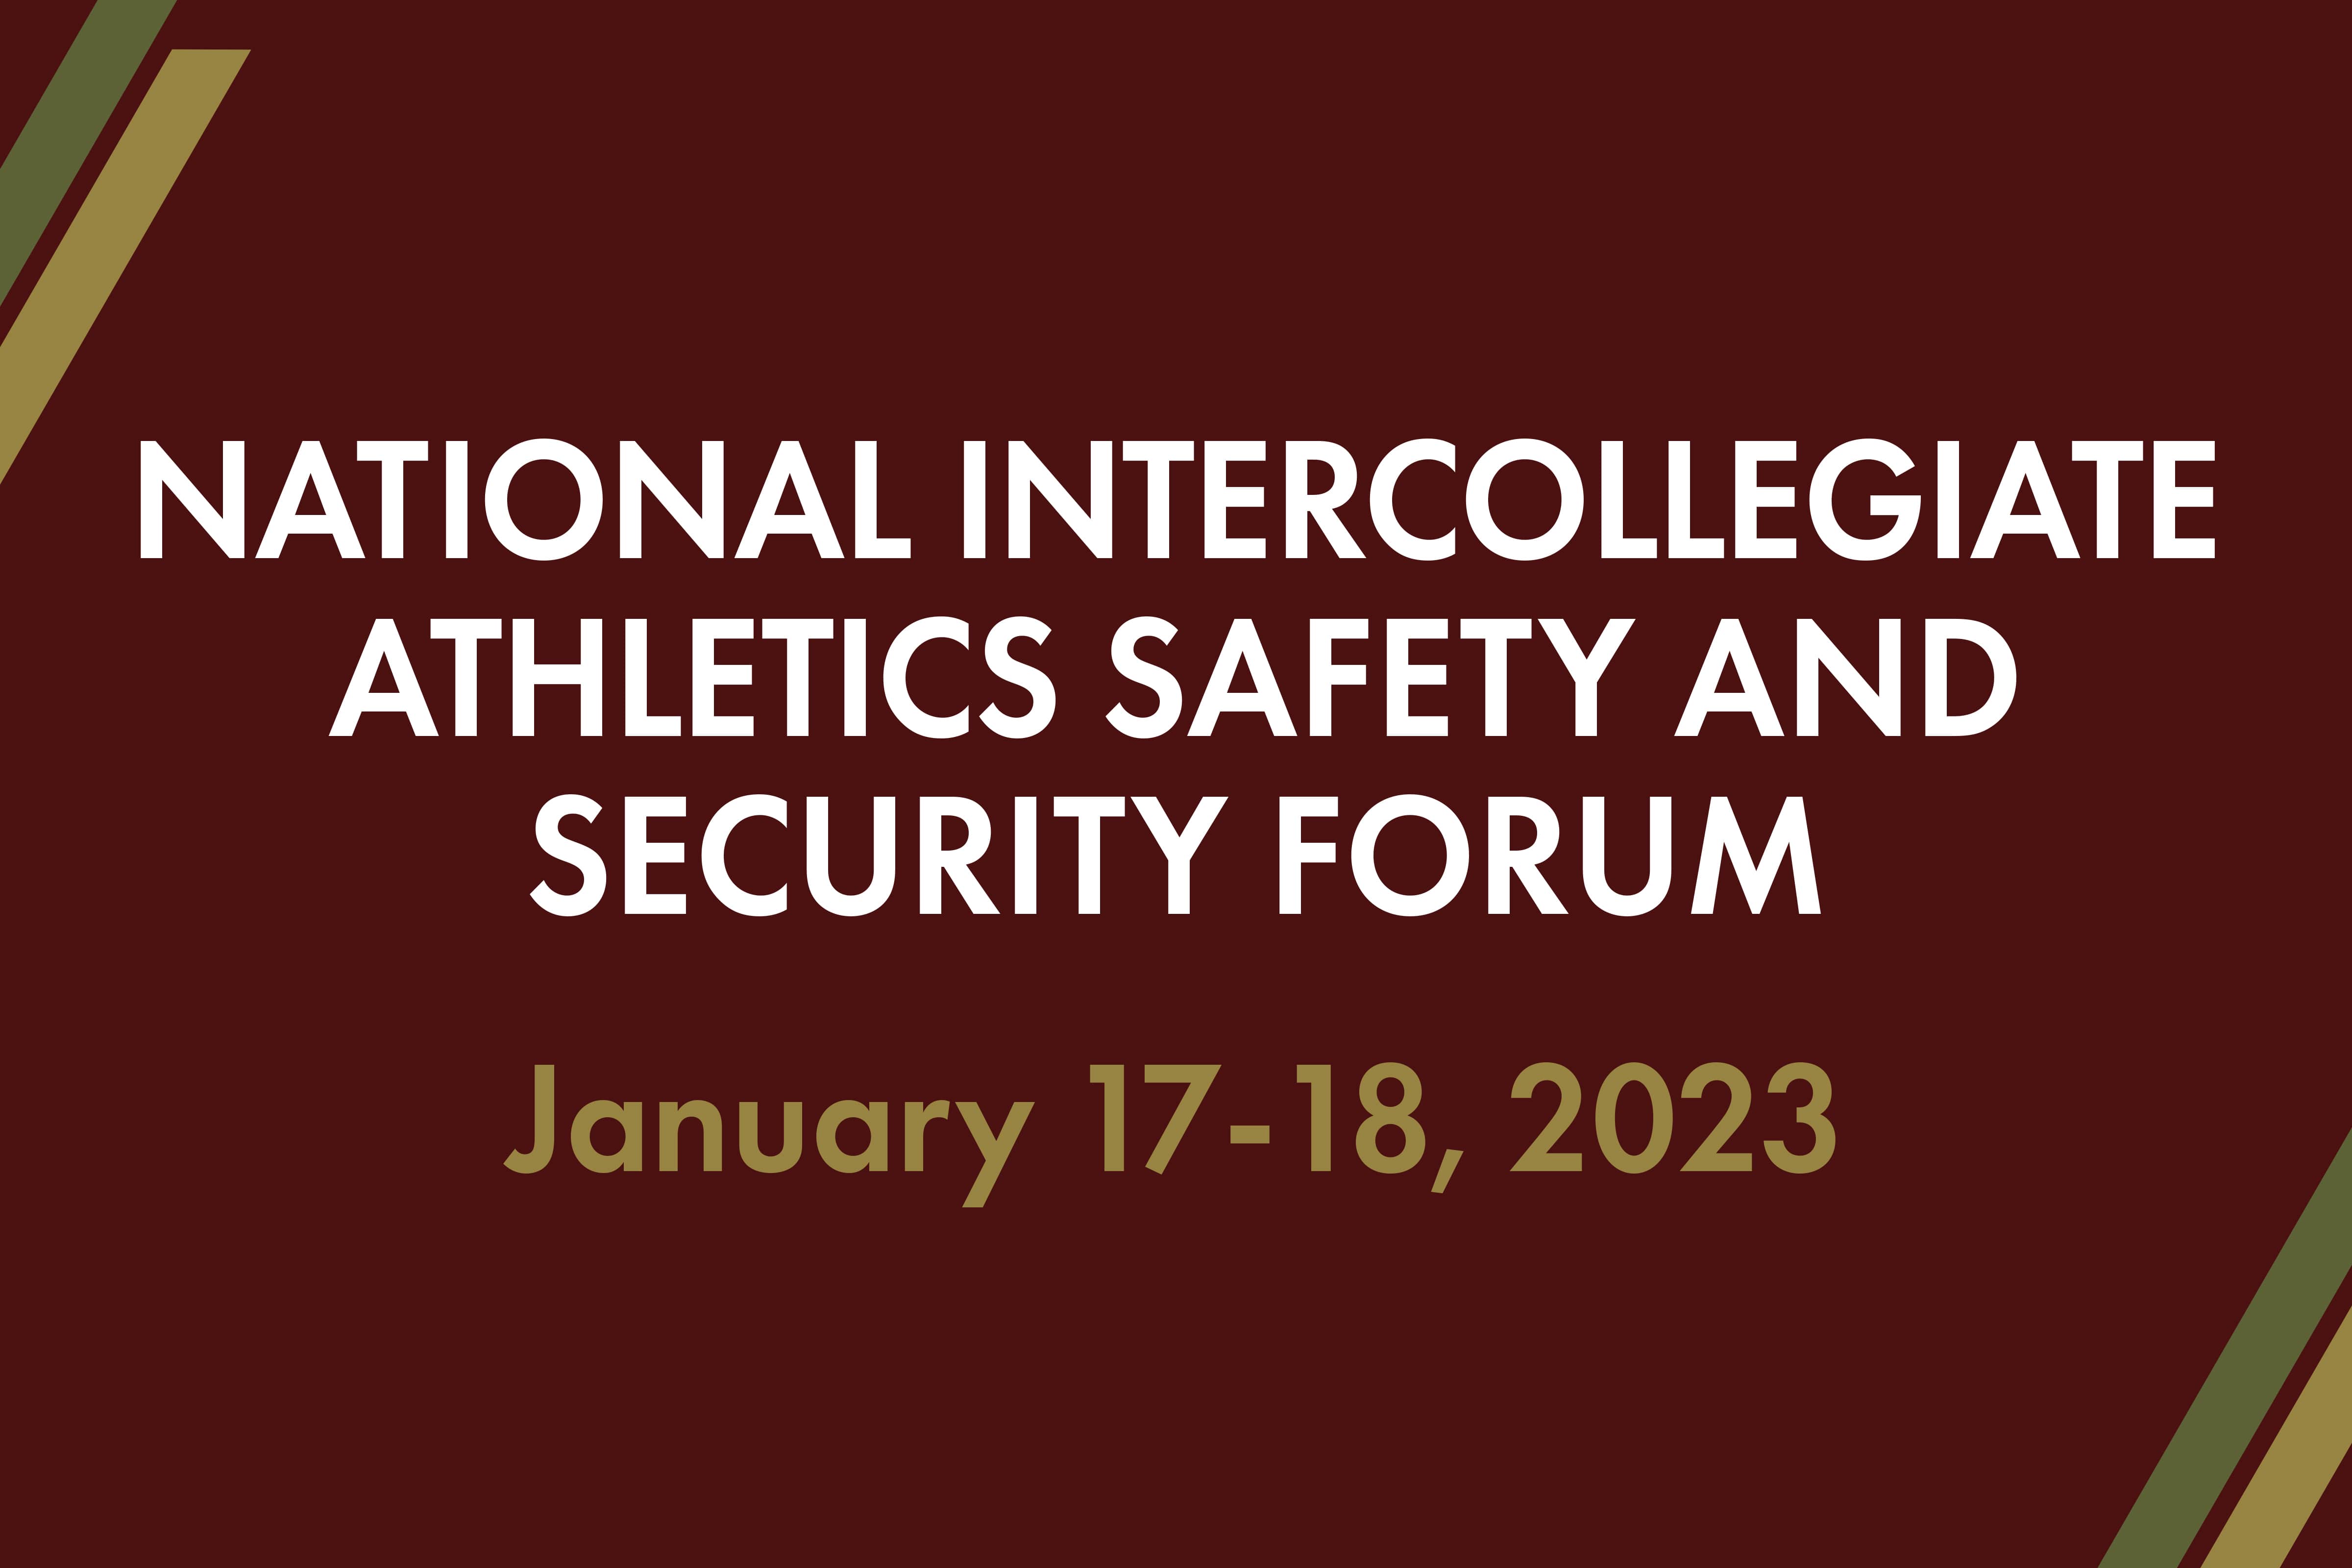 10th National Intercollegiate Athletics Safety and Security Forum on January 17-18, 2023, in College Station, Texas